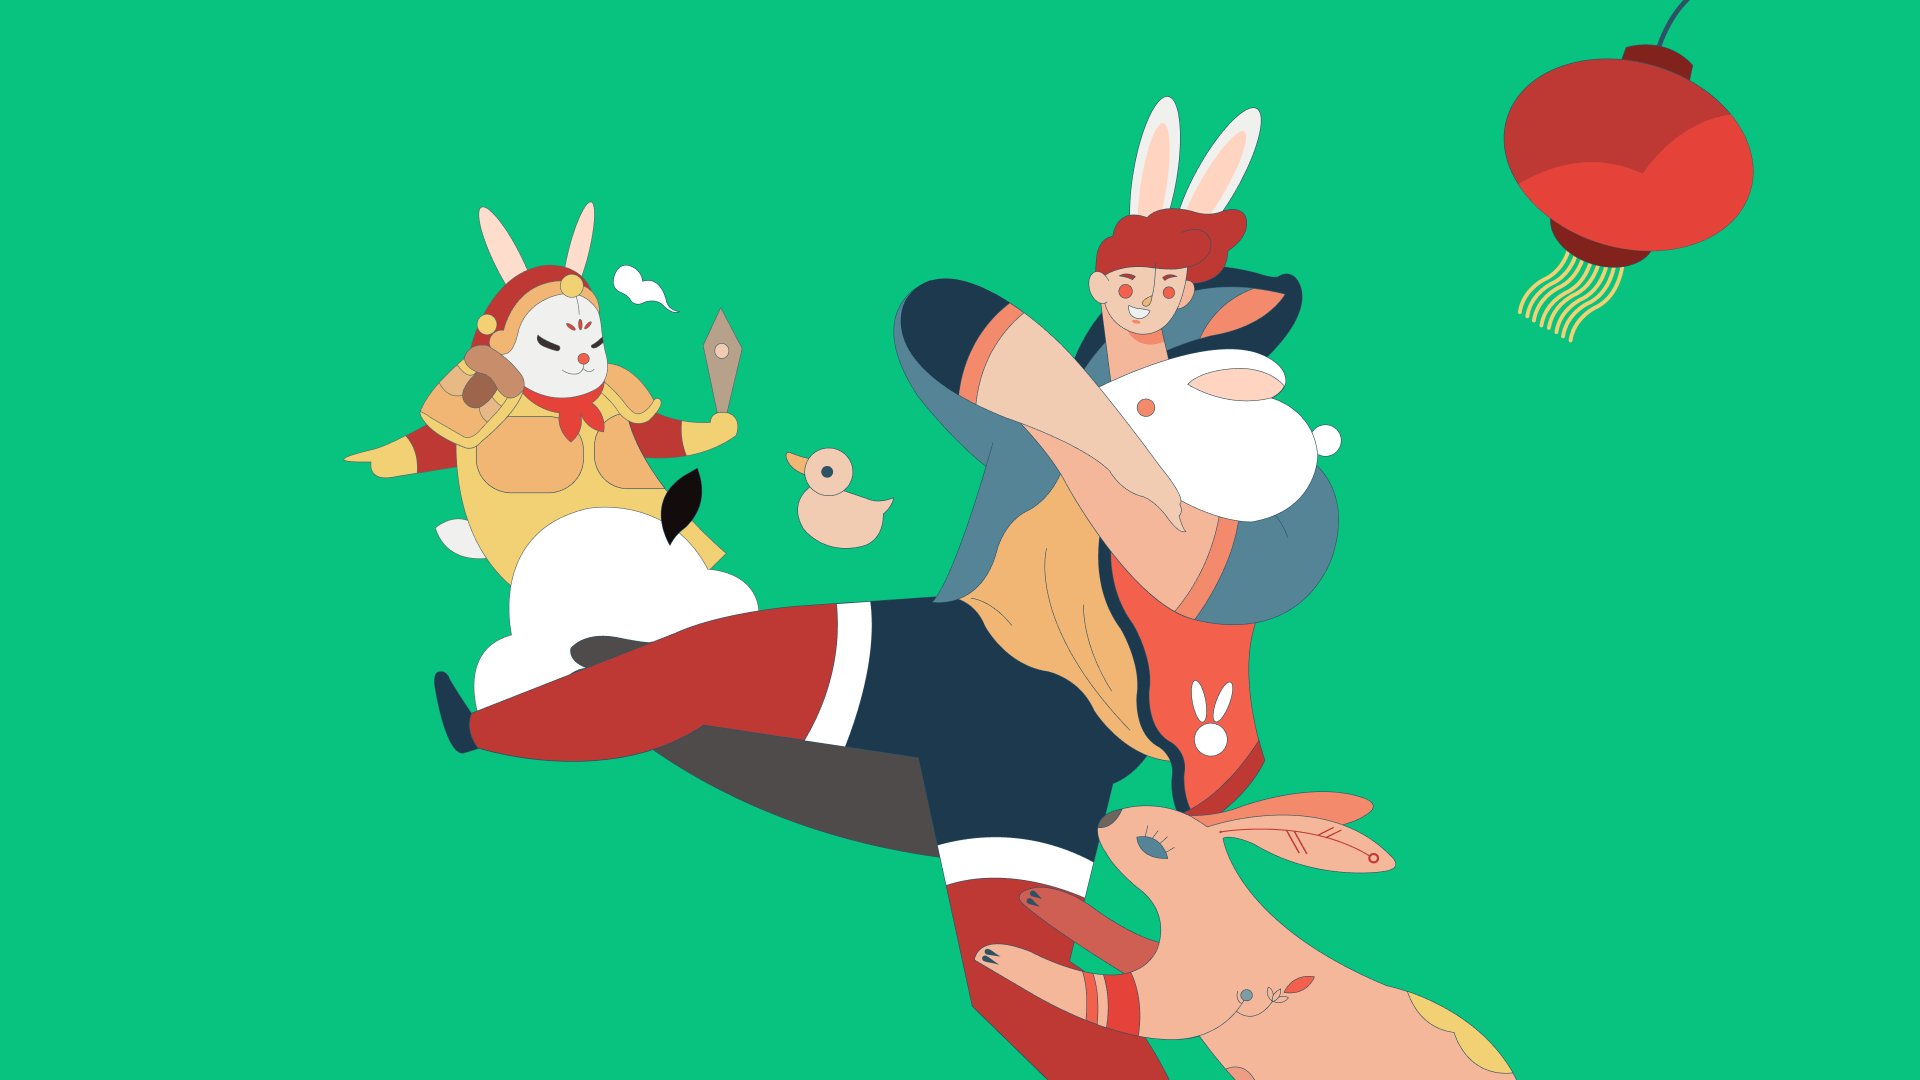 The year of the rabbit